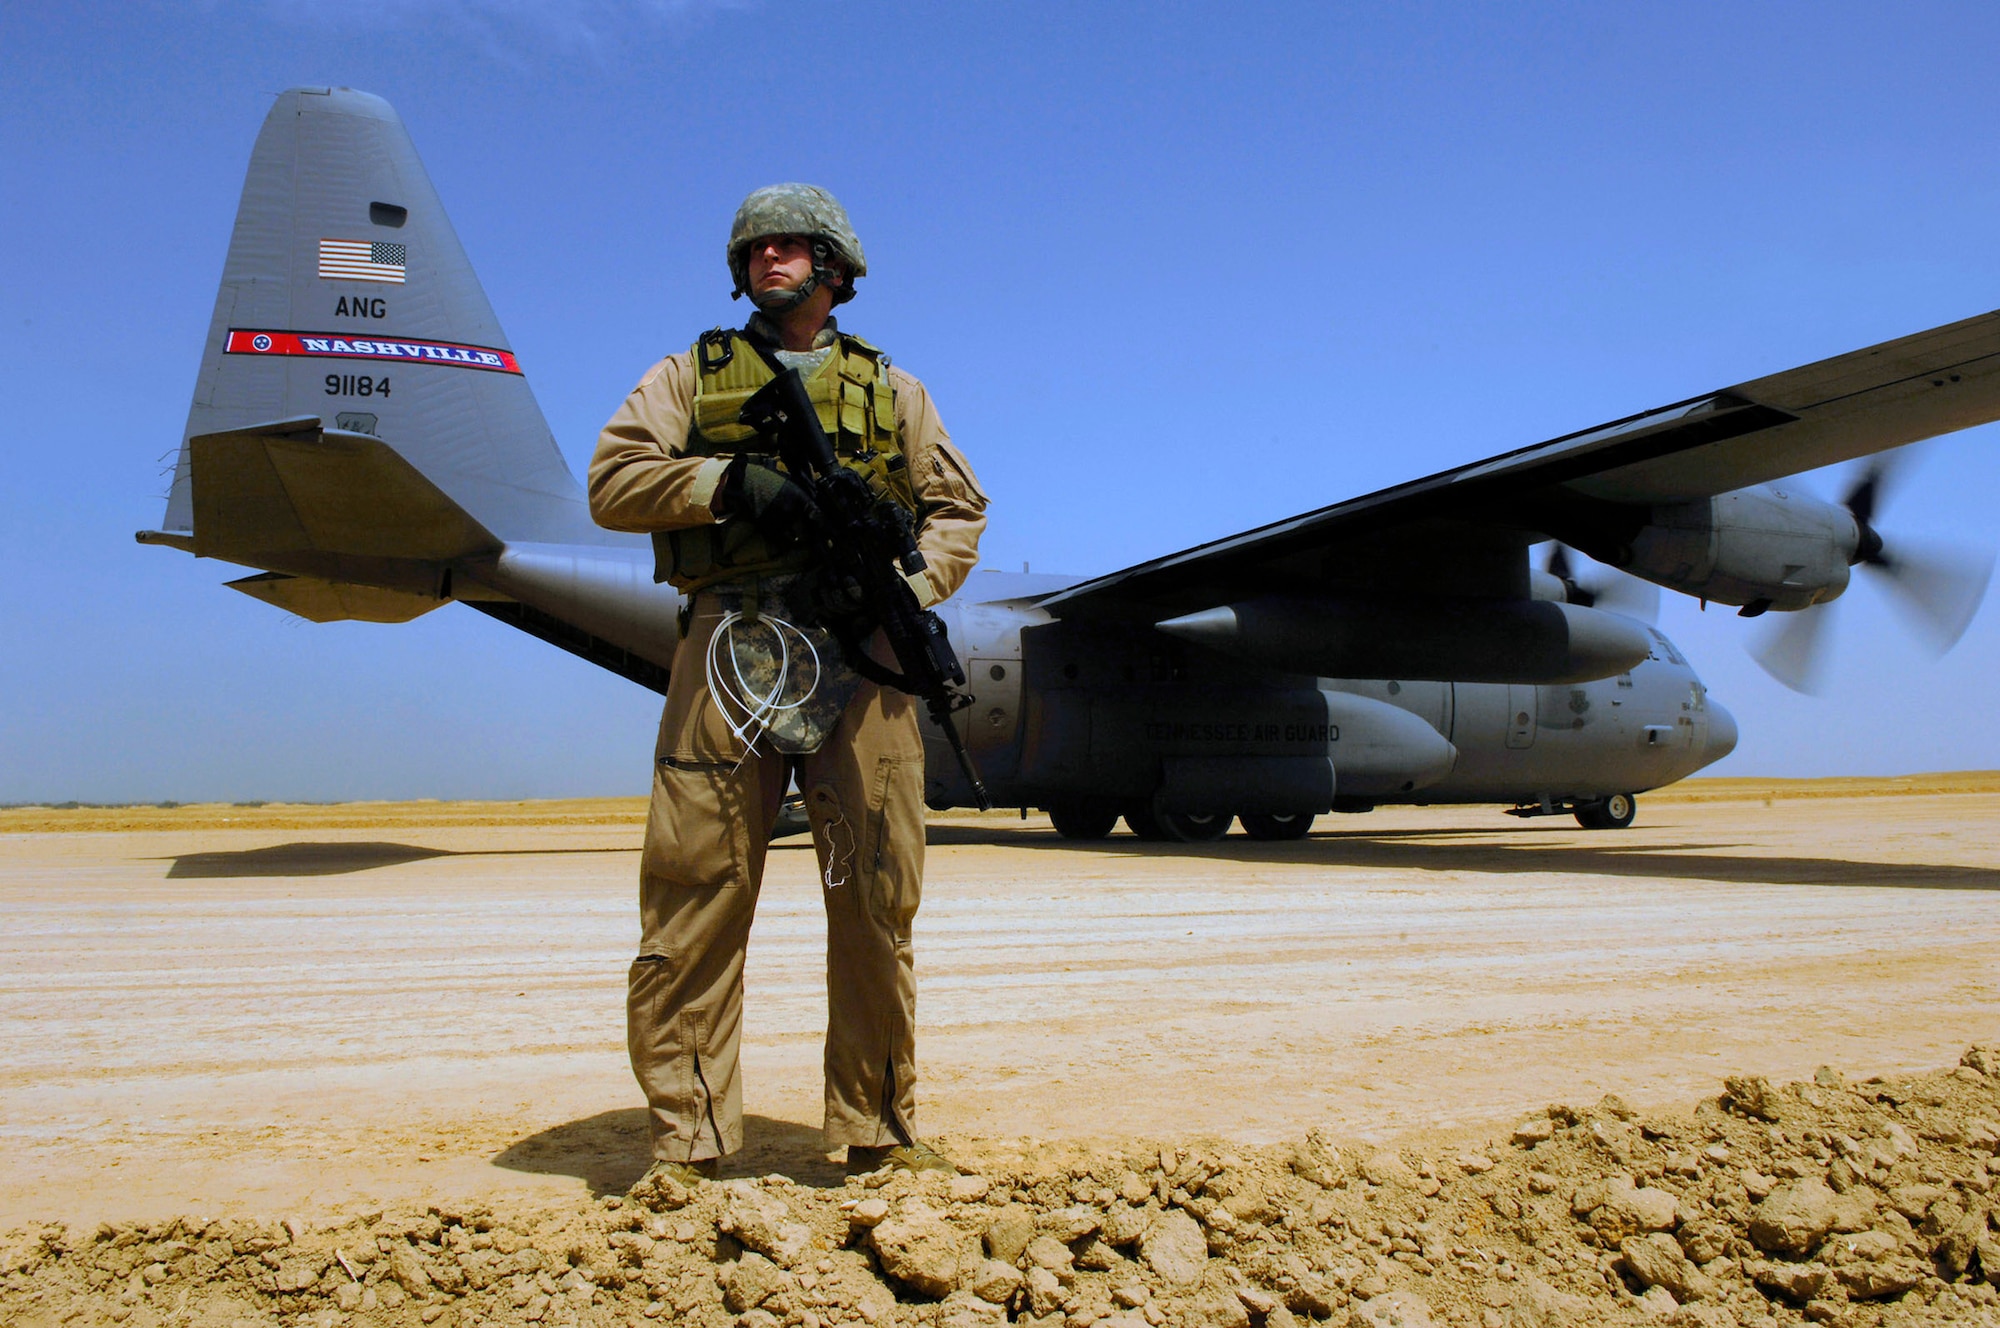 Senior Airman Matt Cooper provides security for a C-130 Hercules aircraft April 18, during a cargo mission in Afghanistan. SrA Cooper is part of a Fly Away Security Forces Team assigned to the 455th Expeditionary Security Forces and deployed from the 355th Security Forces Squadron, Davis-Monthan Air Force Base, Ariz. The C-130 is the prime transport for air dropping troops and equipment into hostile areas. (U.S. Air Force photo/Master Sgt. Andy Dunaway) 